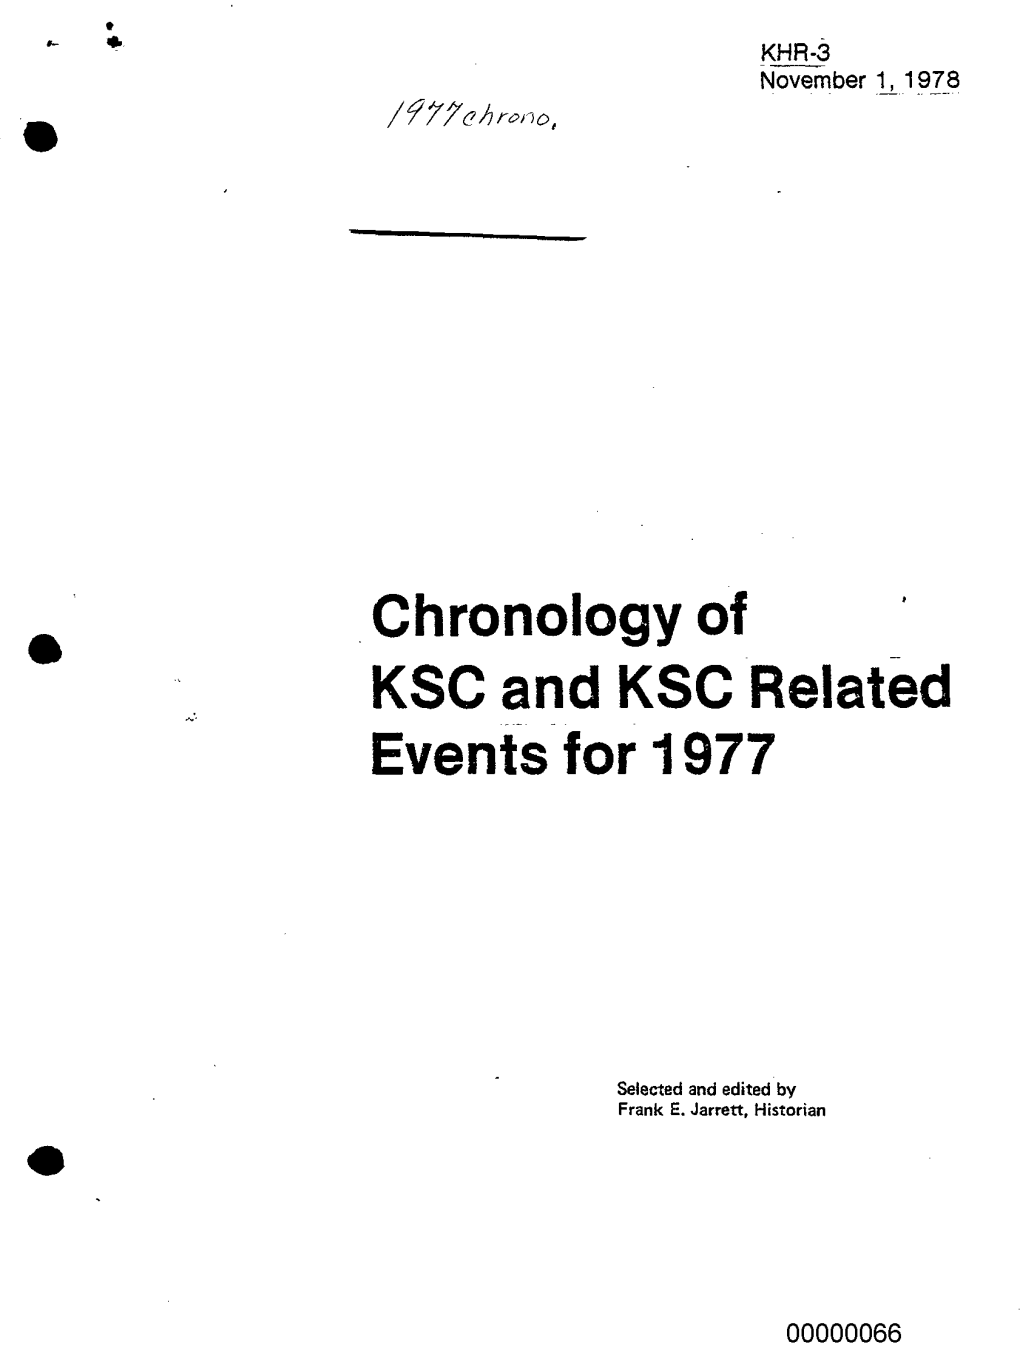 Chronology of KSC and KSC Related Events for 1977